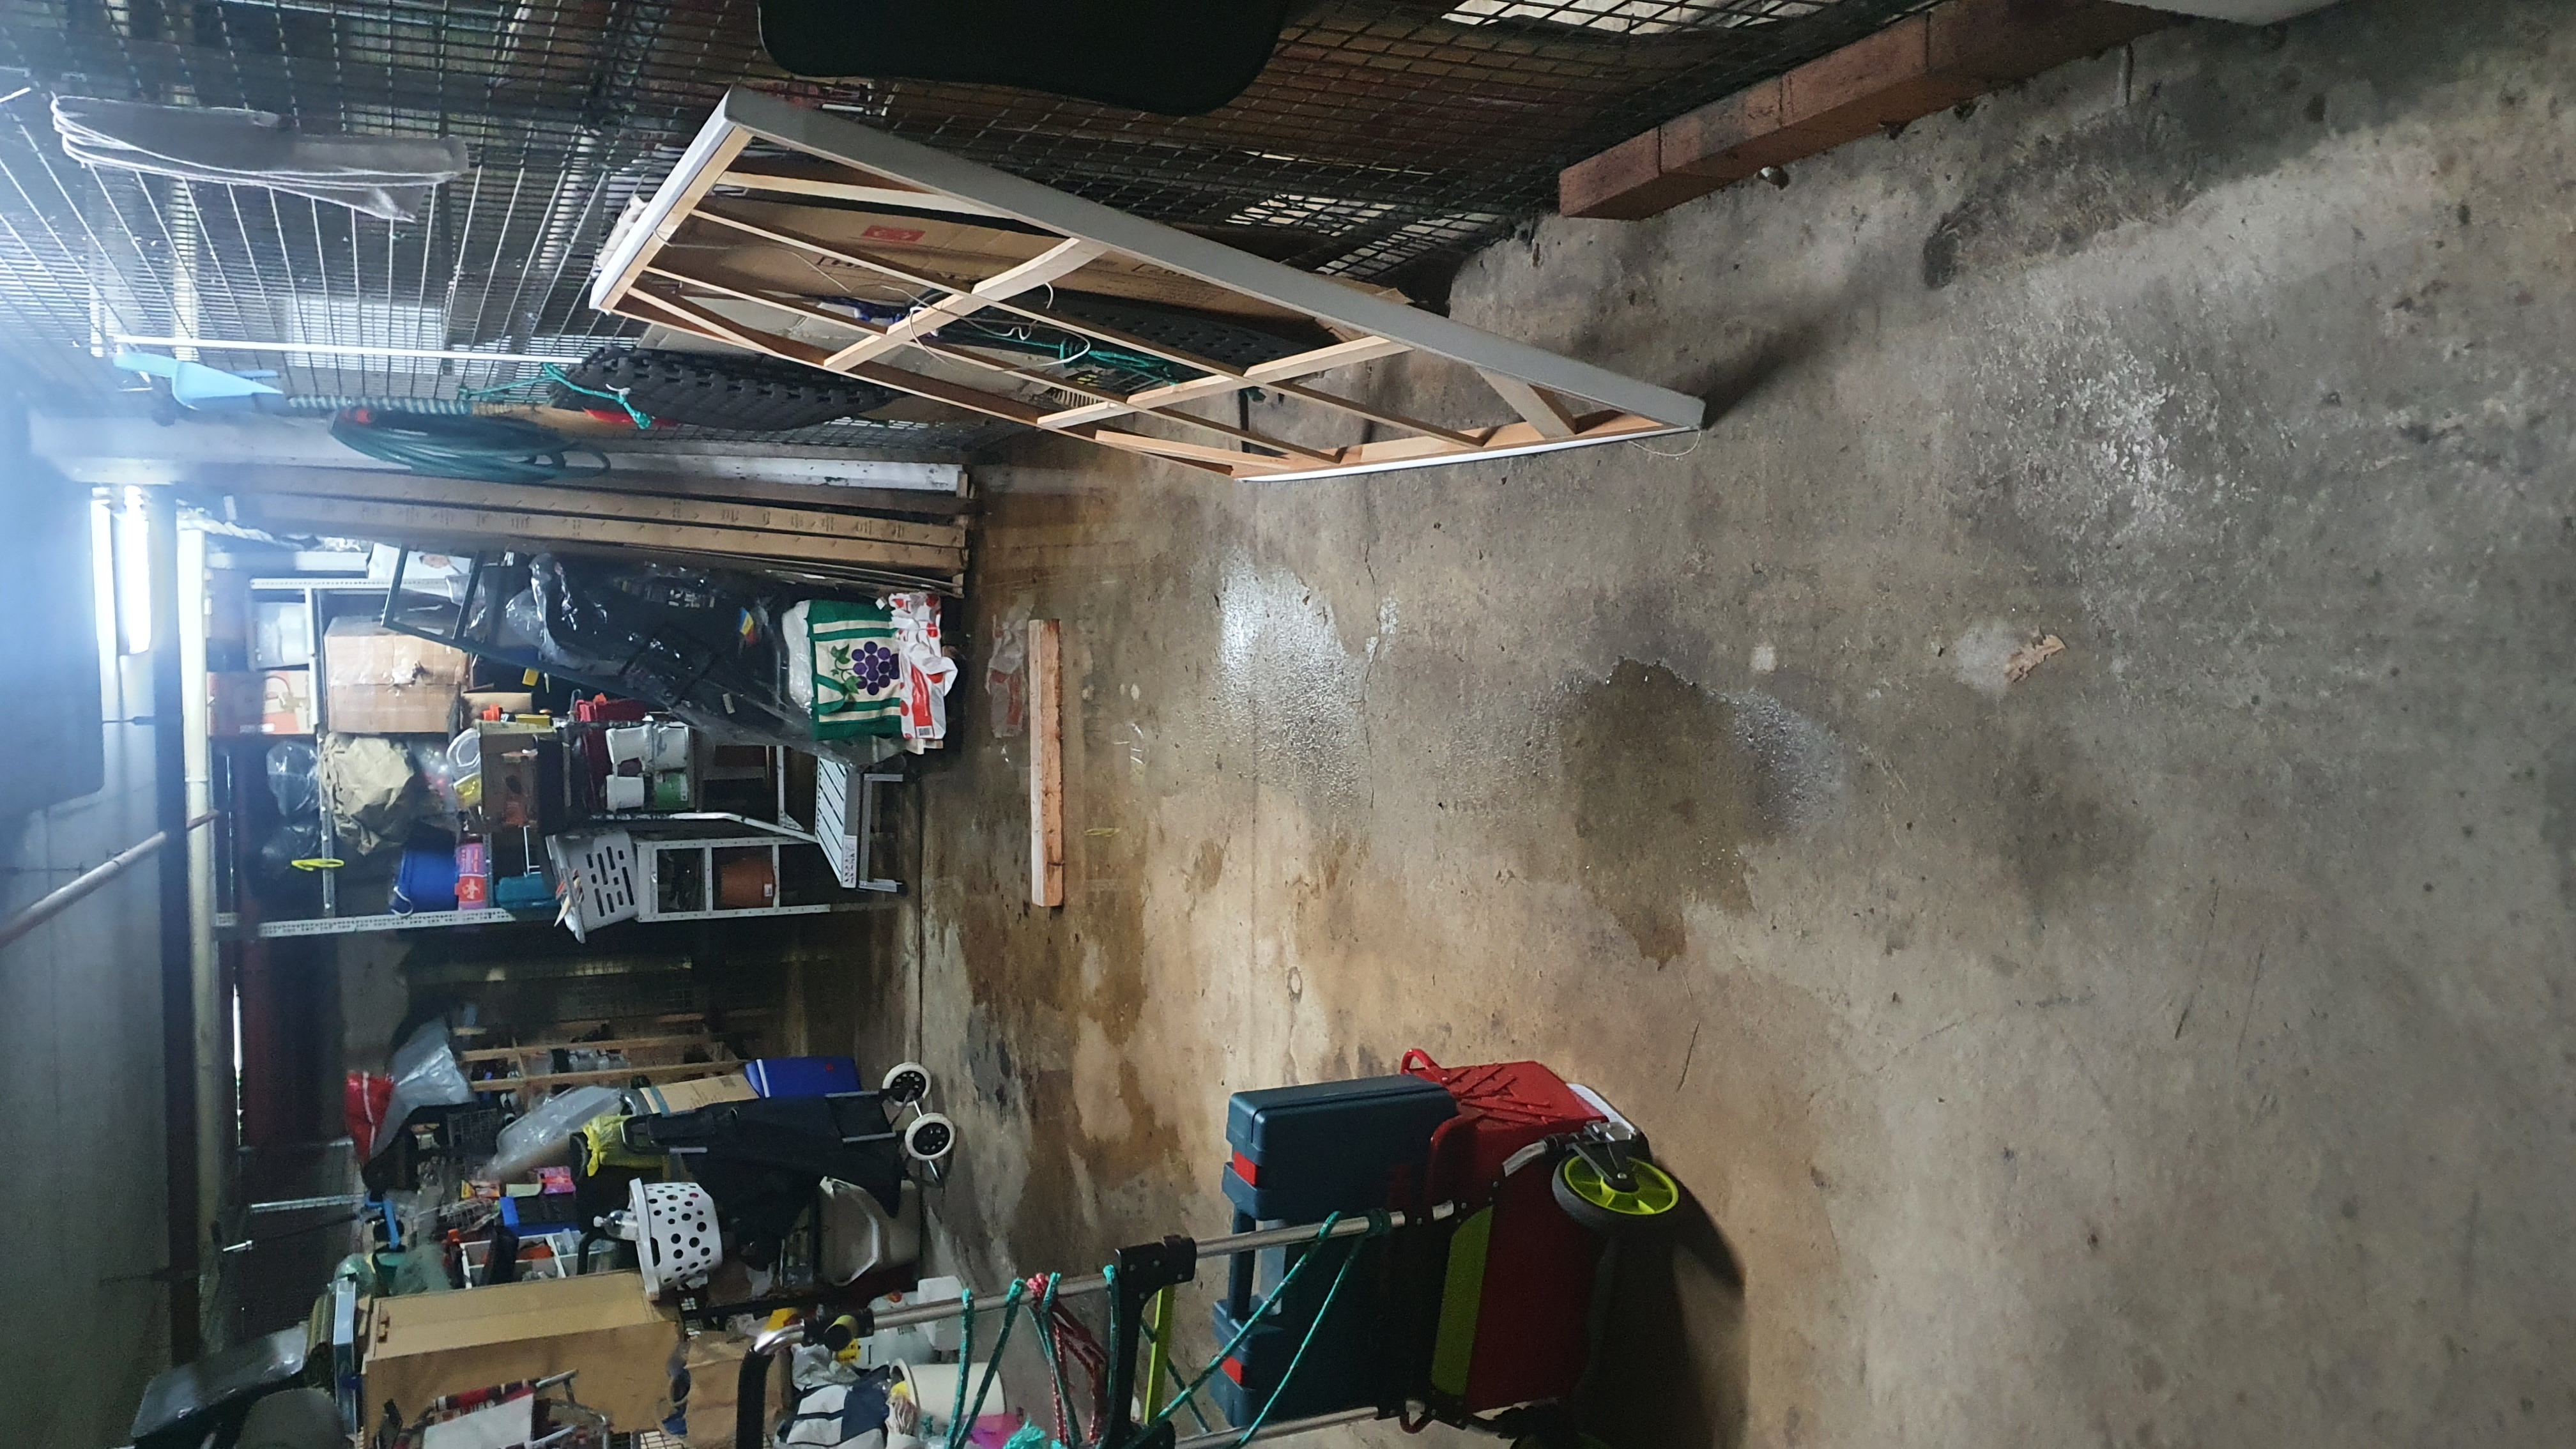 SP52948-examples-of-serious-damages-due-to-water-leakages-in-Lot-186-garage-photo-1-1Mar2022.jpg